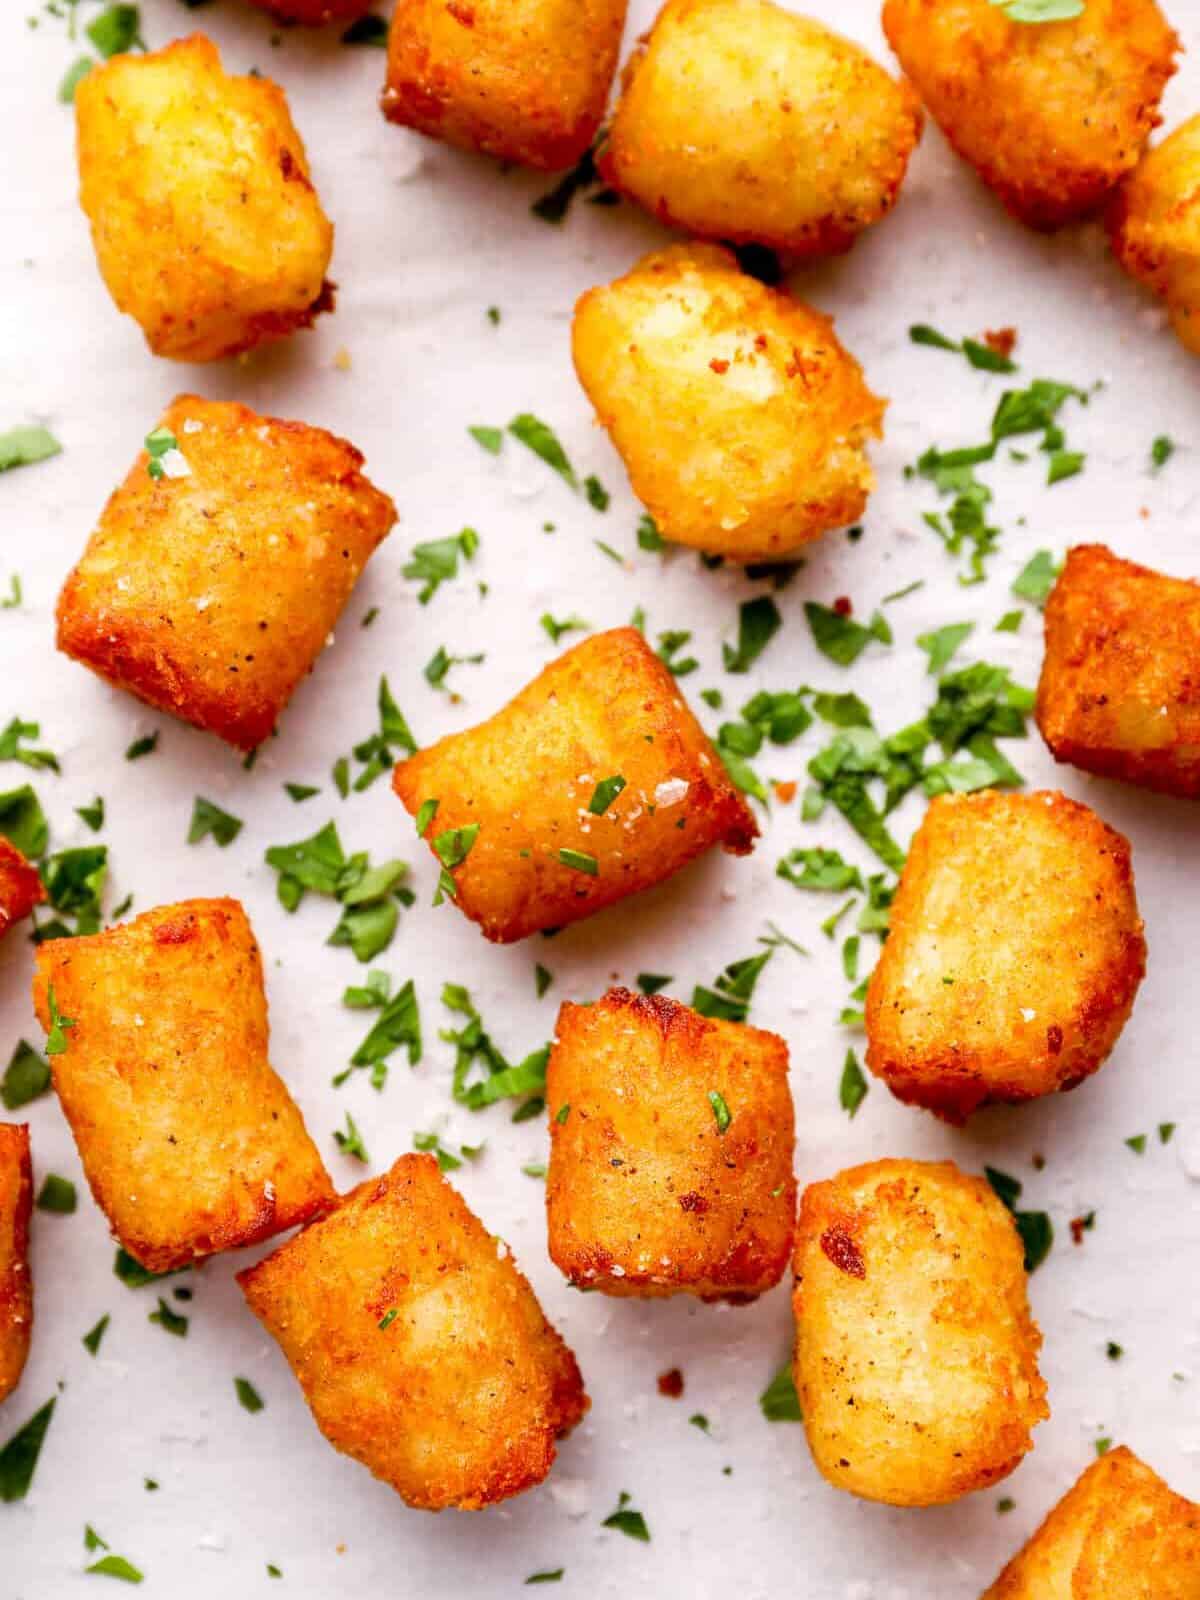 overhead view of scattered baked tater tots topped with parsley.